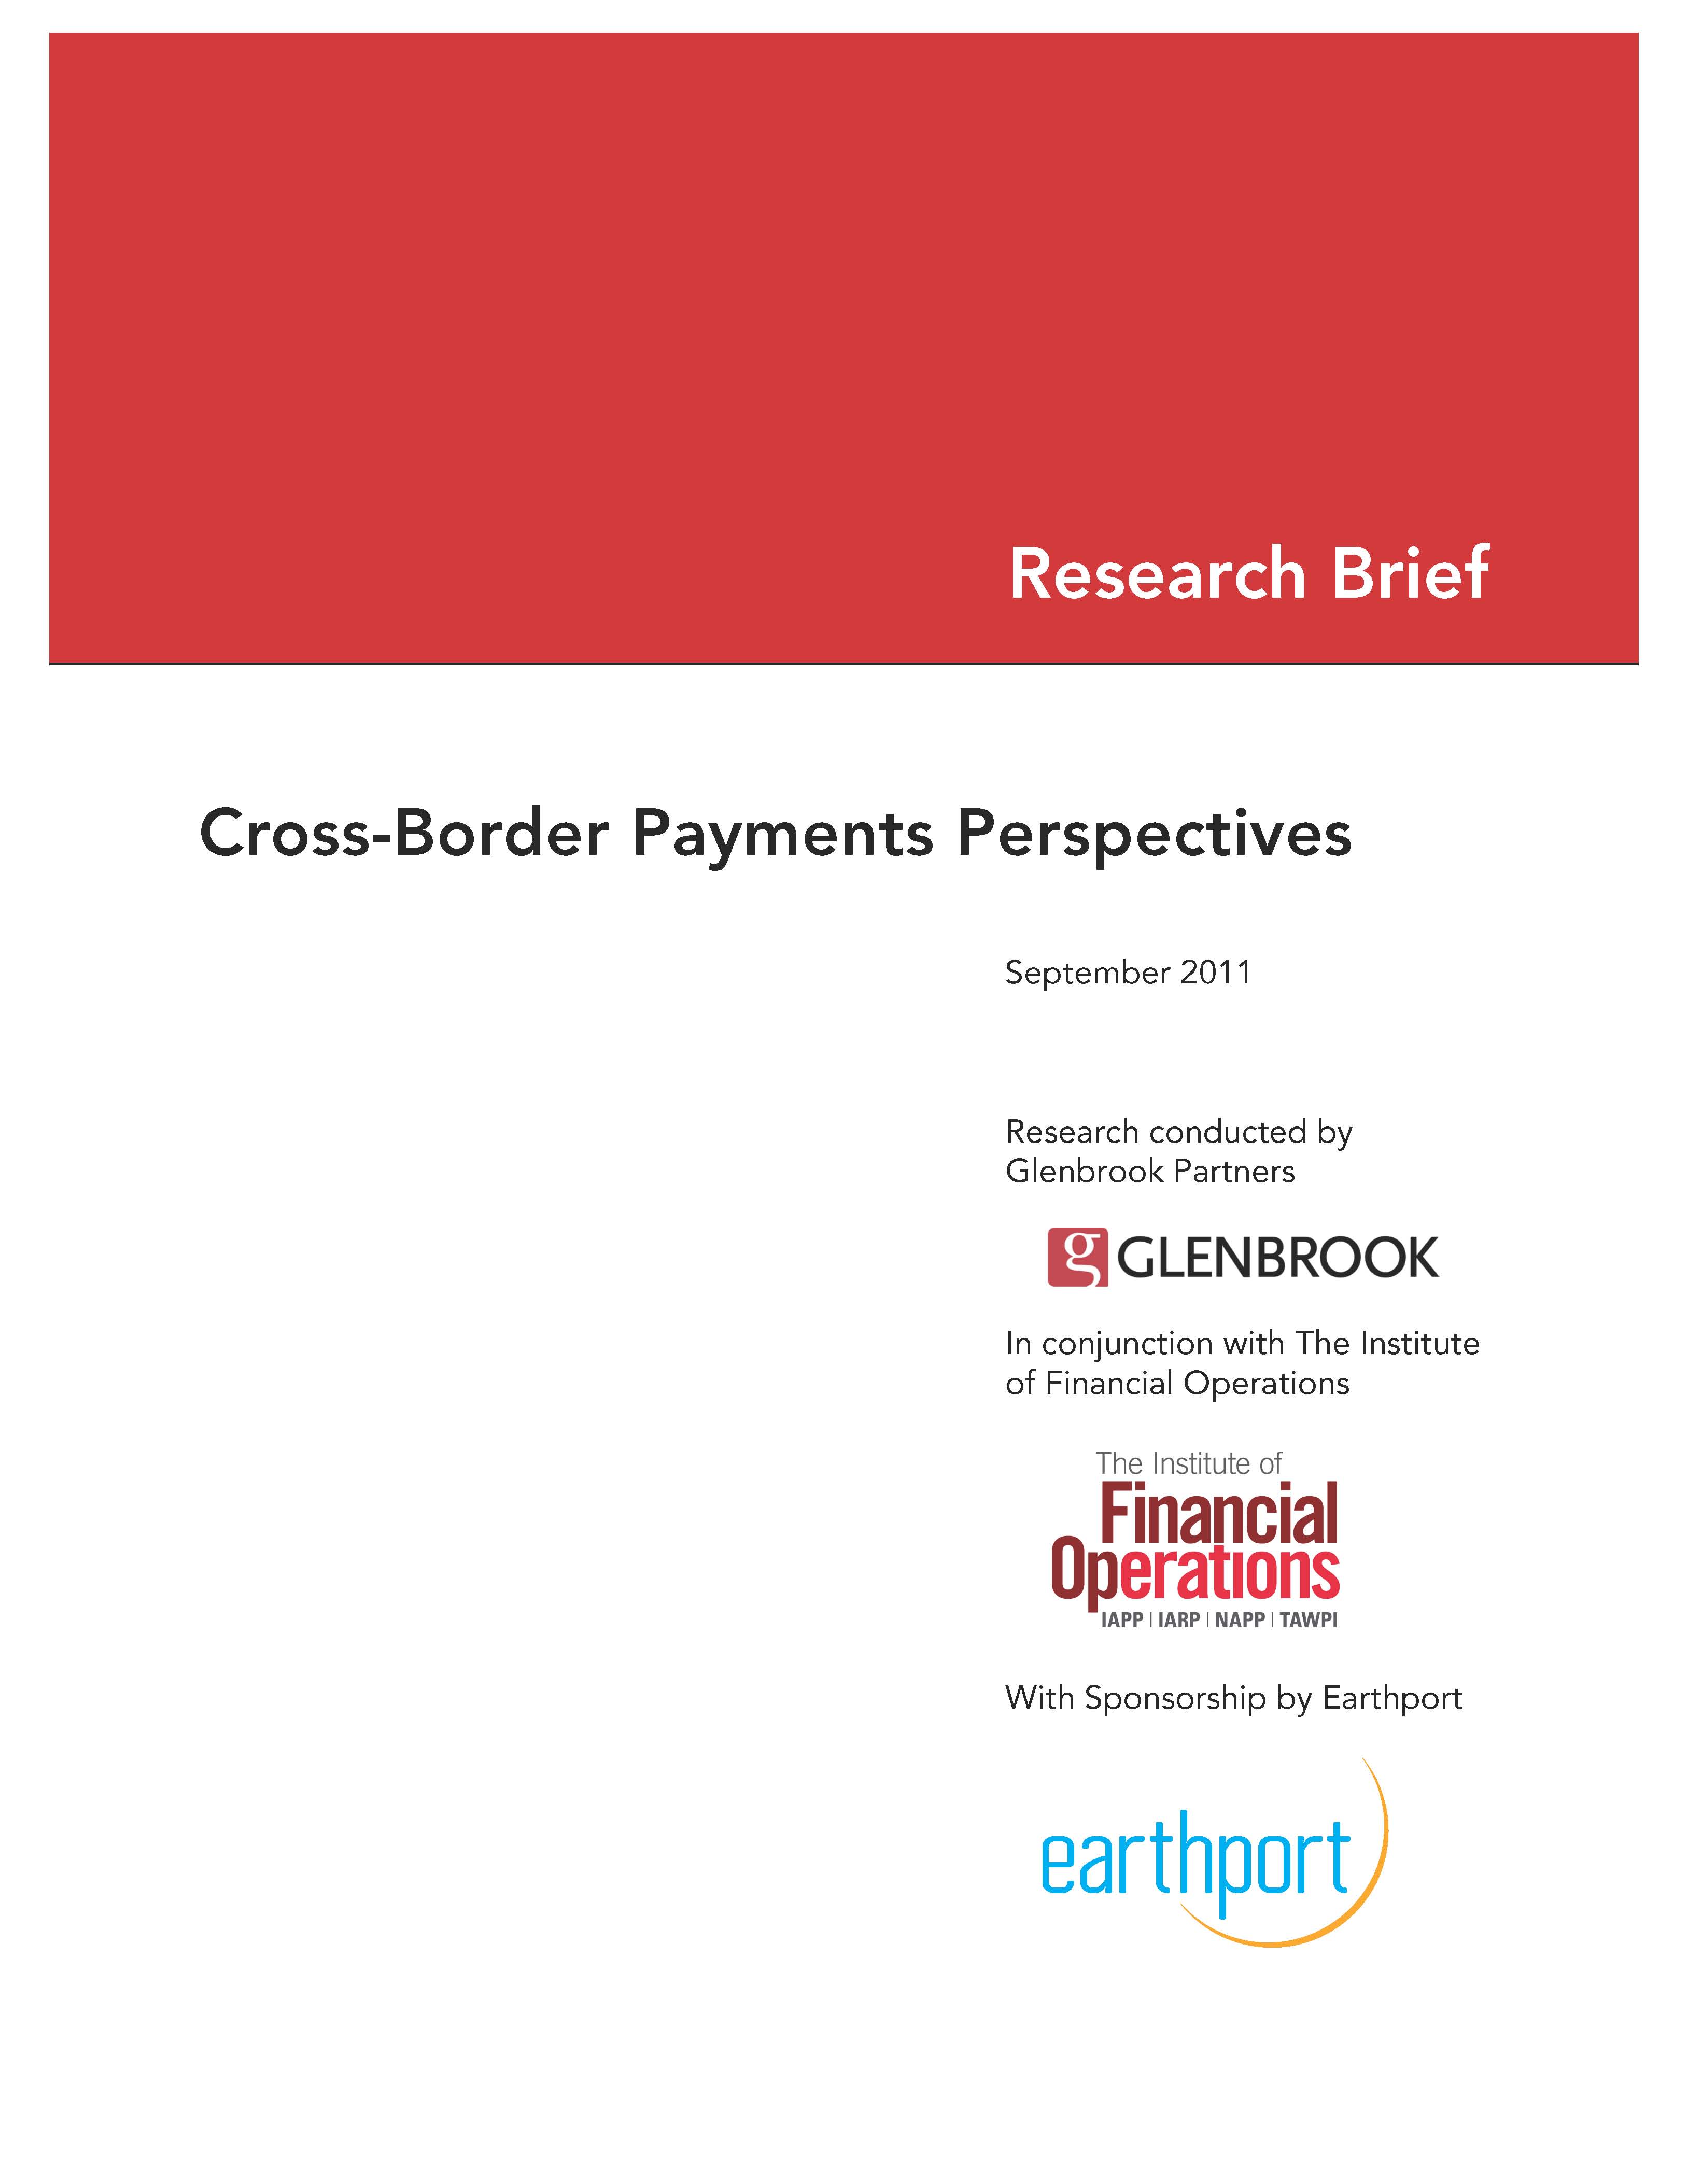 Cross Border Payments Perspectives